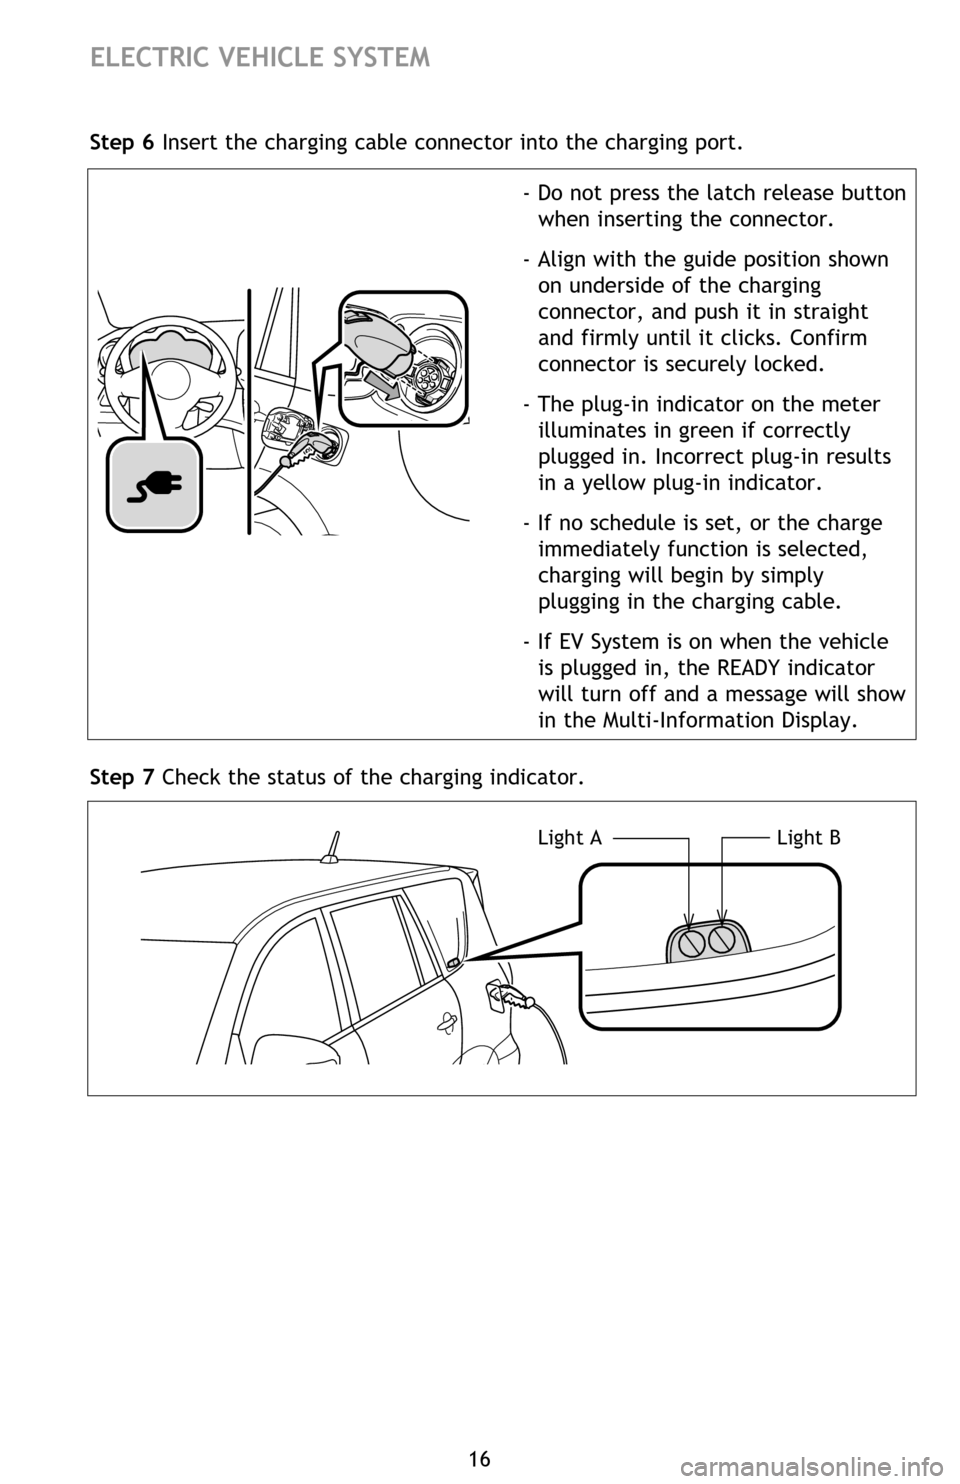 TOYOTA RAV4 EV 2012 1.G Quick Reference Guide 16
ELECTRIC VEHICLE SYSTEM
Step 6 Insert the charging cable connector into the charging port.
- Do not press the latch release button when inserting the connector.
- Align with the guide position show